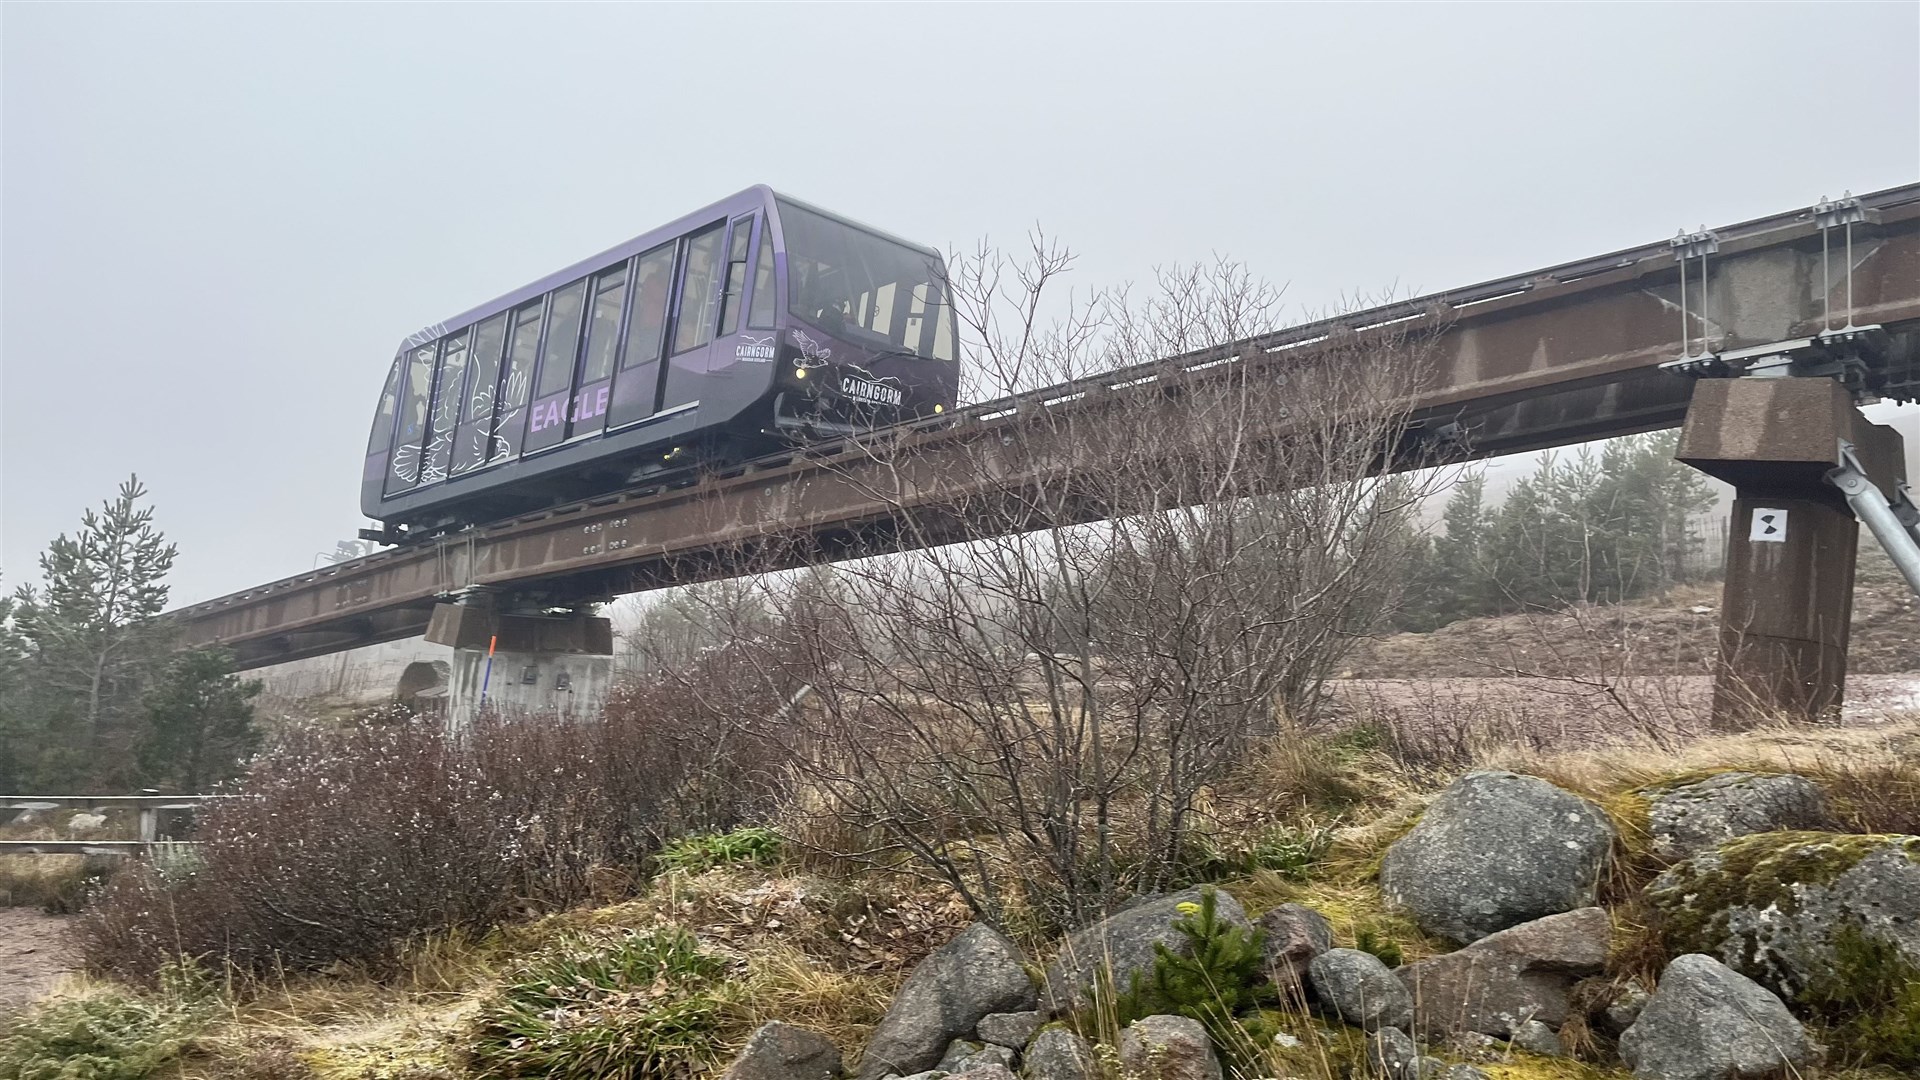 The project to fix the funicular has been one of the most complex and challenging in Scotland in recent memory.